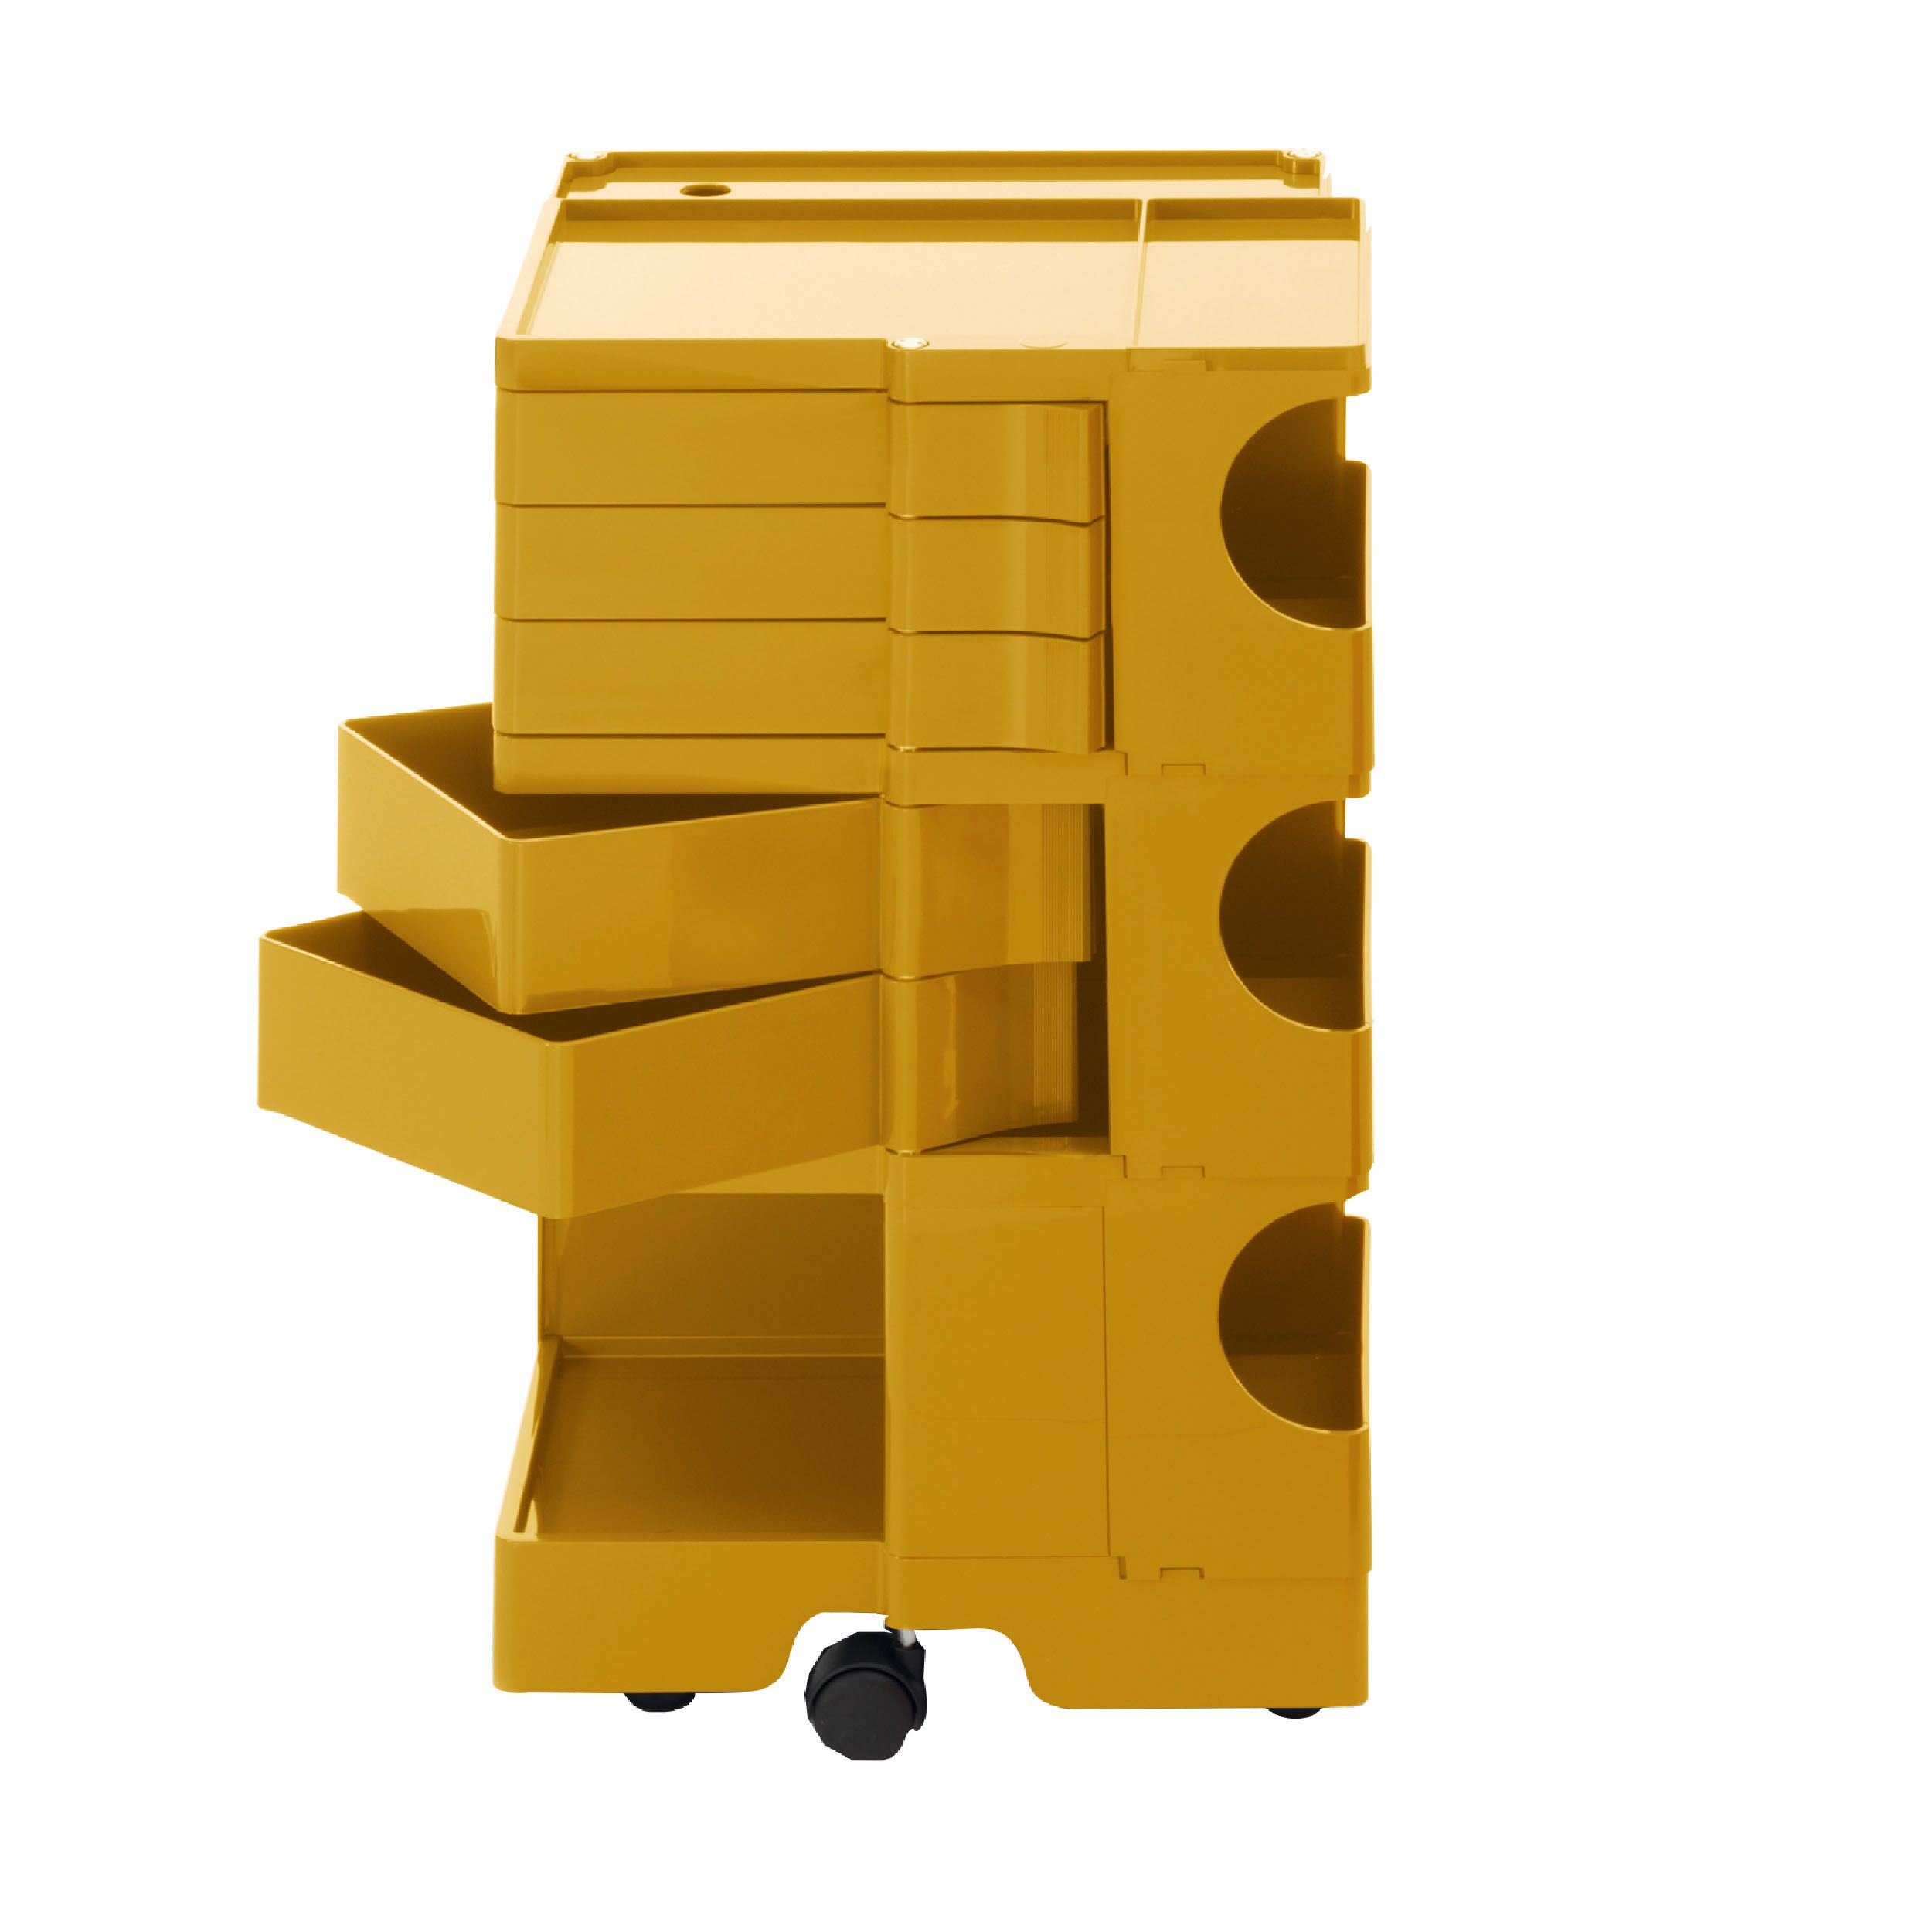 Boby Rollcontainer